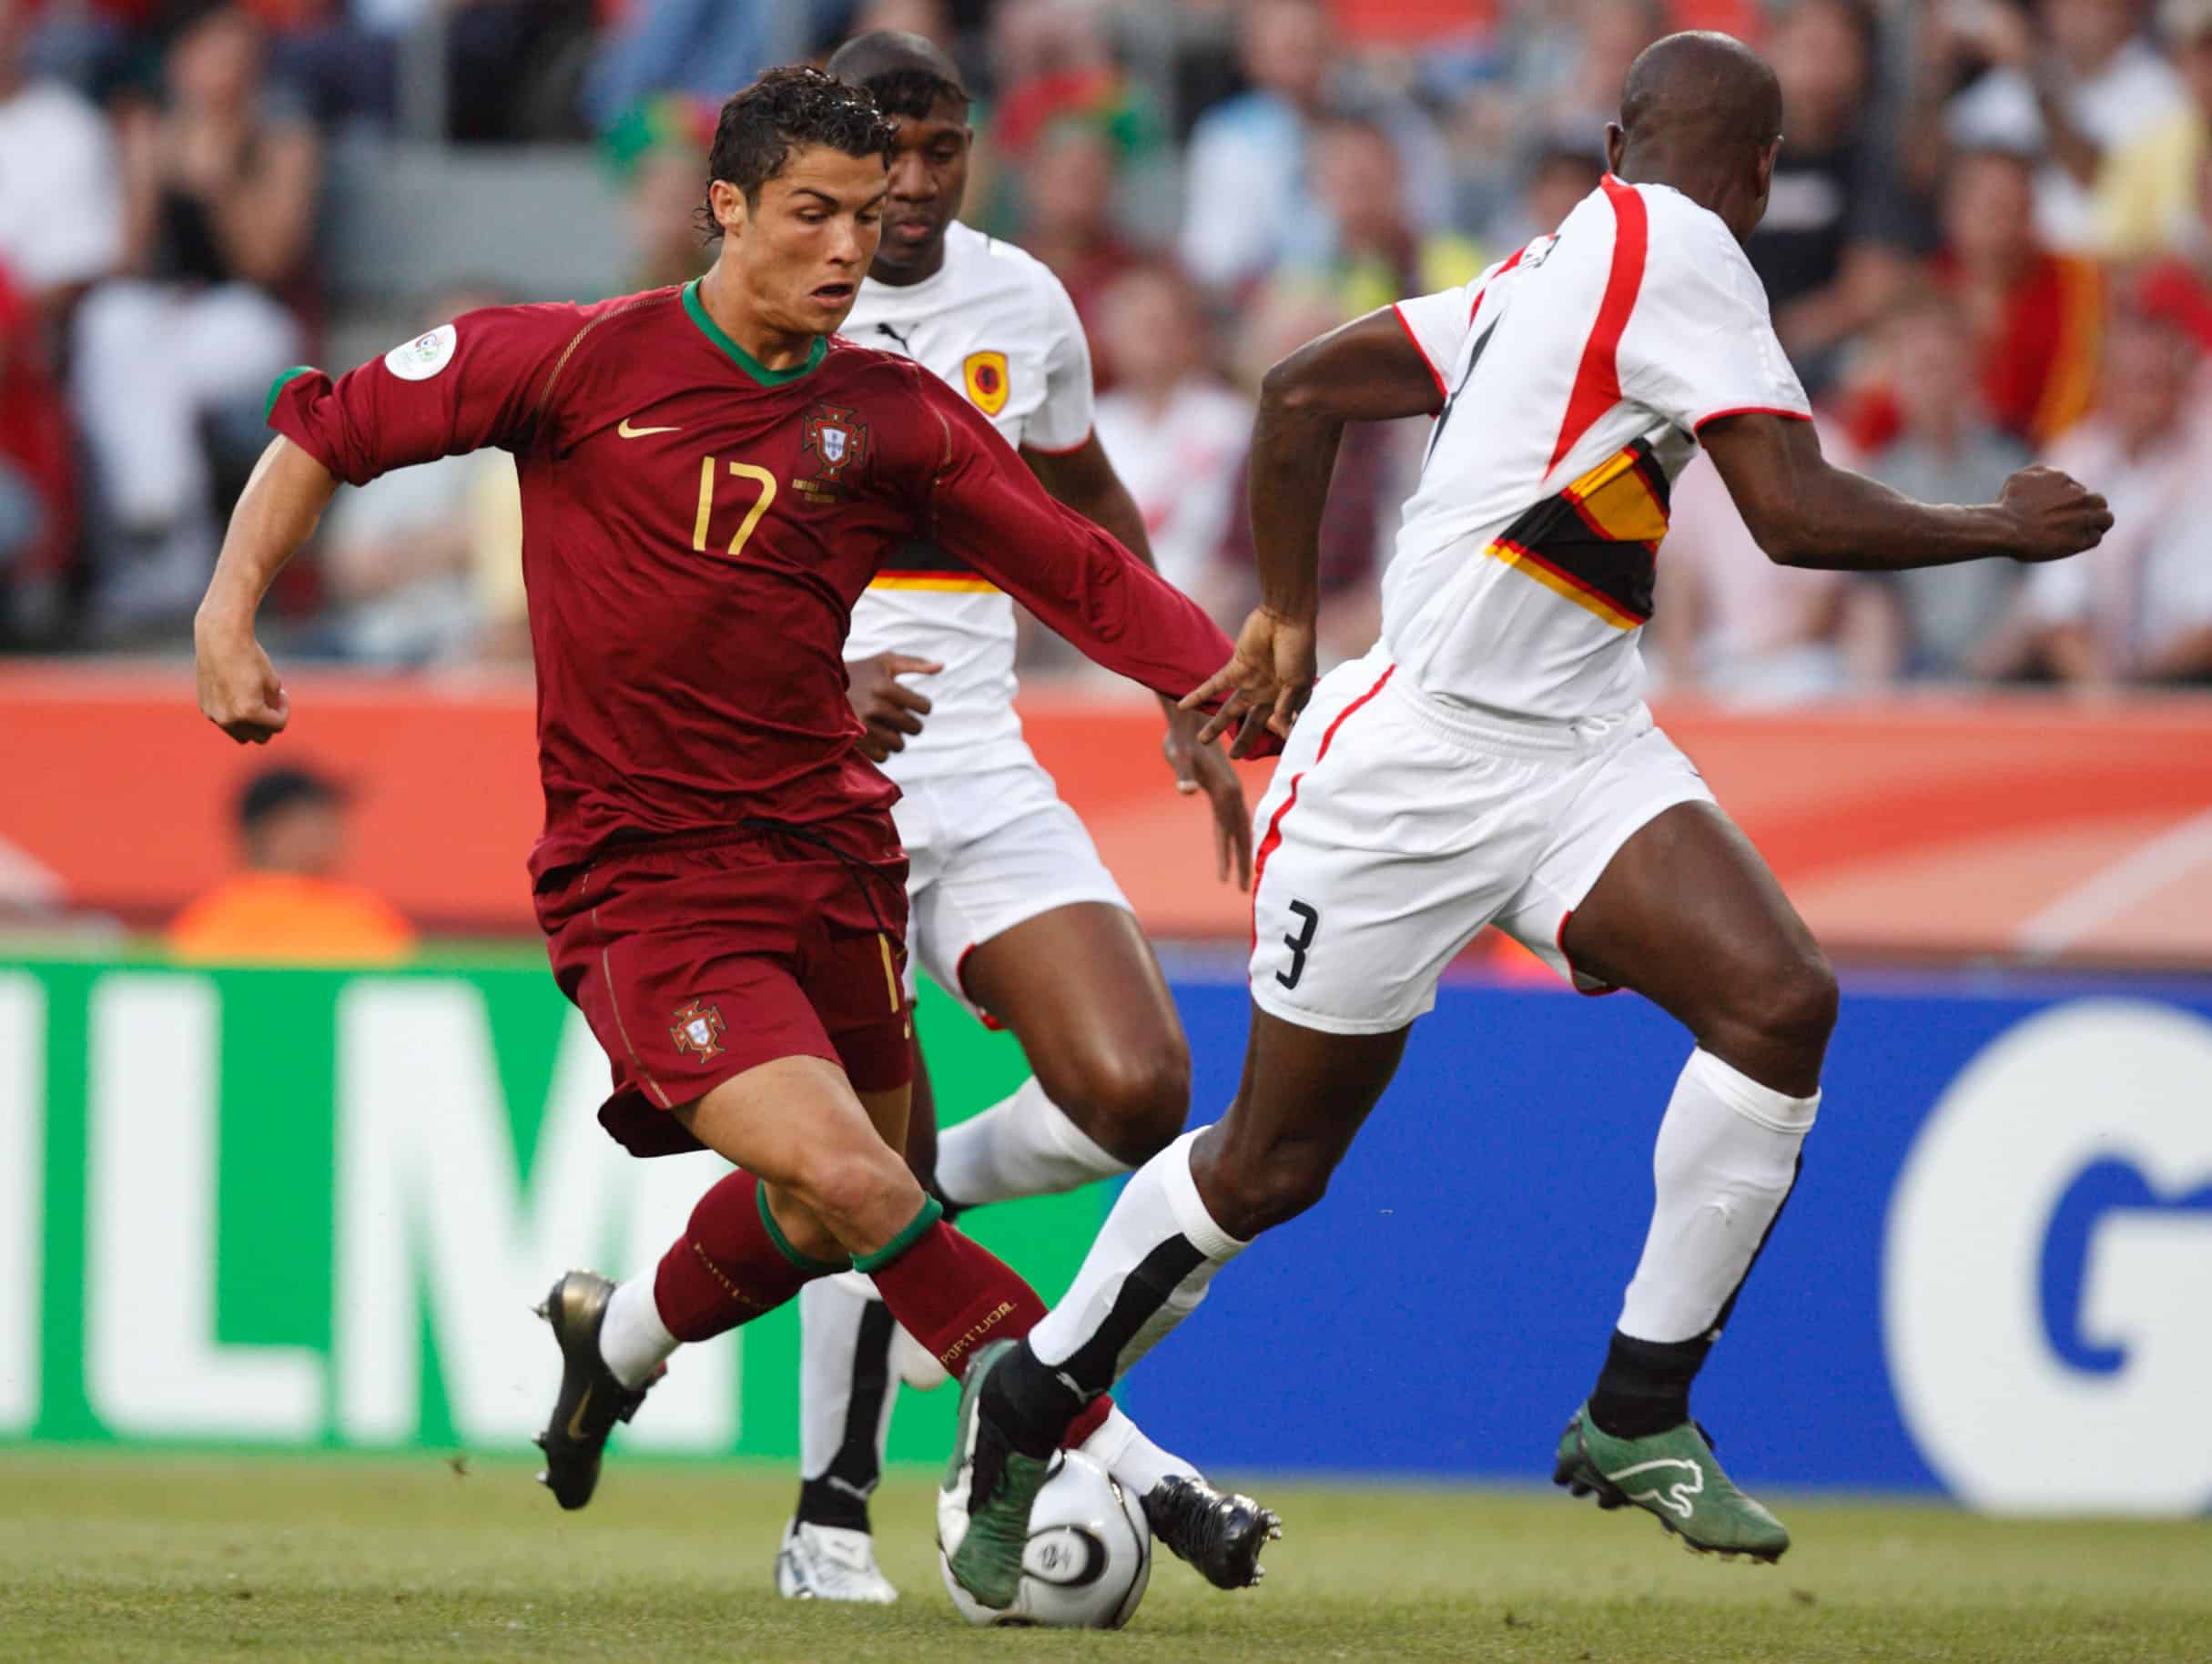 Cristiano Ronaldo of Portugal drives the ball during a FIFA World Cup soccer match against Angola June 11, 2006.